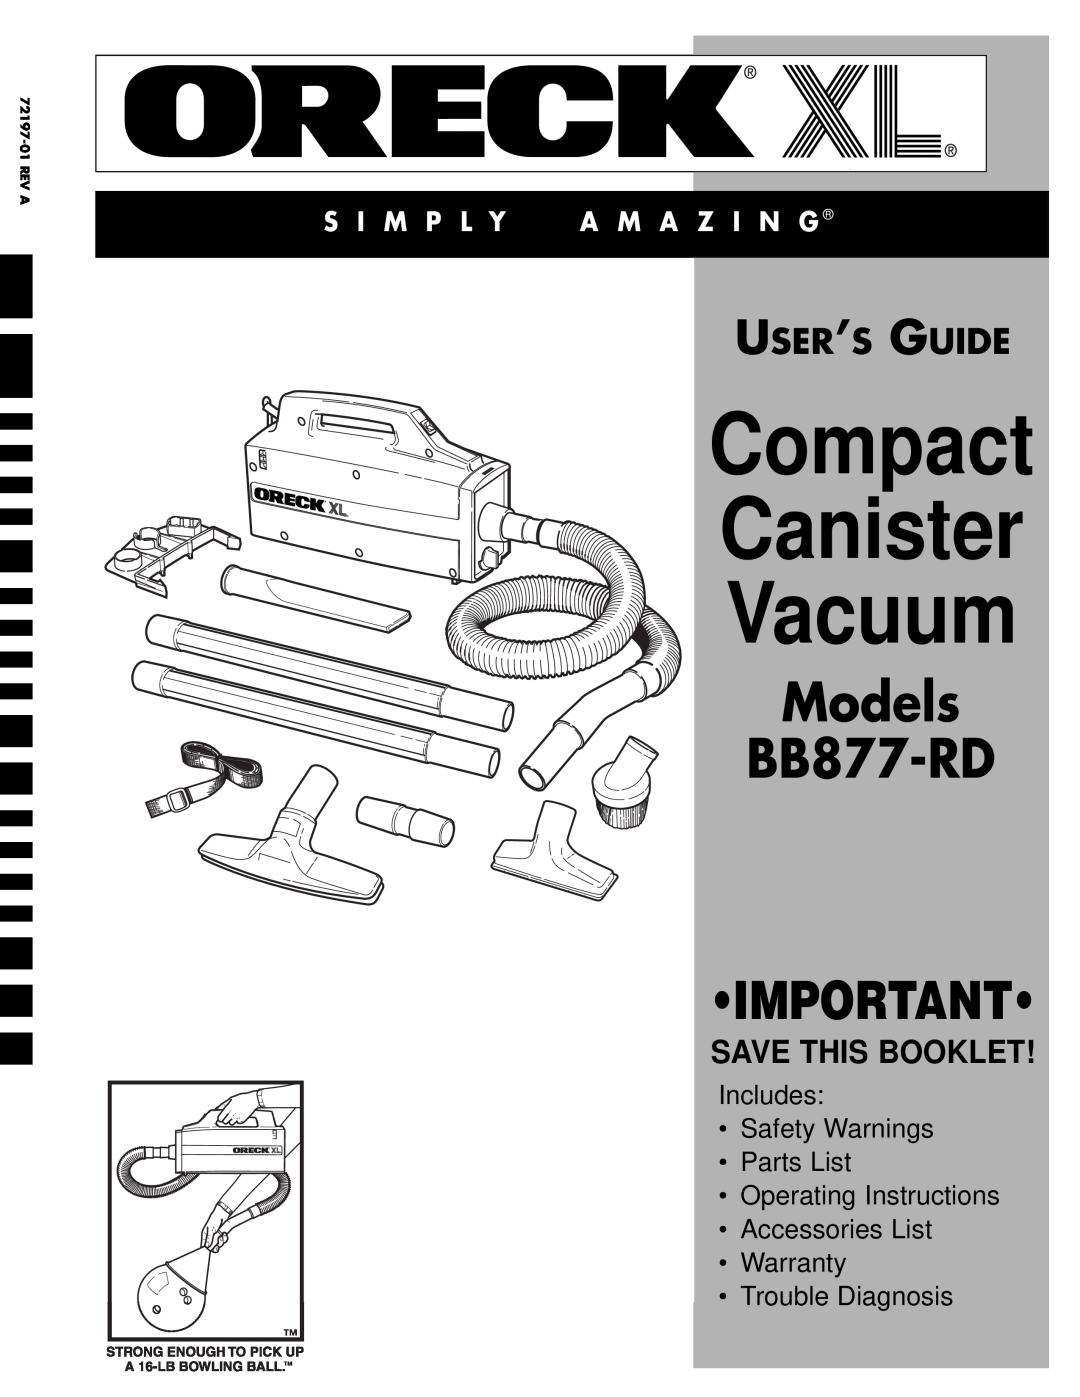 Oreck operating instructions Save This Booklet, Compact Canister Vacuum, Models BB877-RD IMPORTANT, User’S Guide 